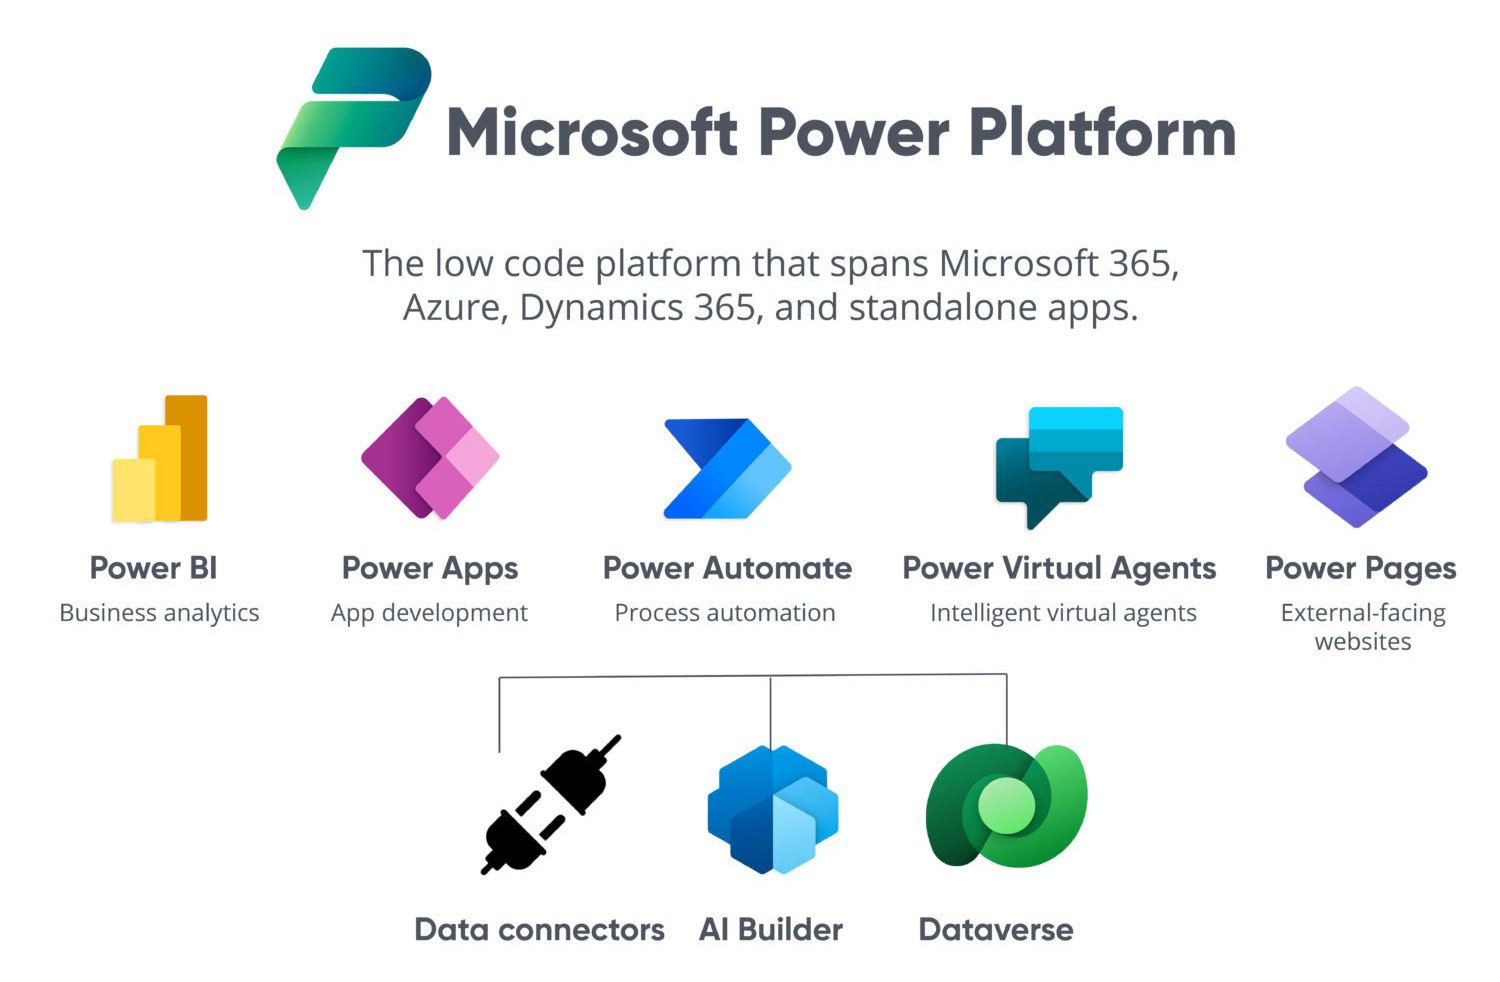 Overview of the Microsoft Power Platform and its connection to other apps in the Microsoft Portfolio.